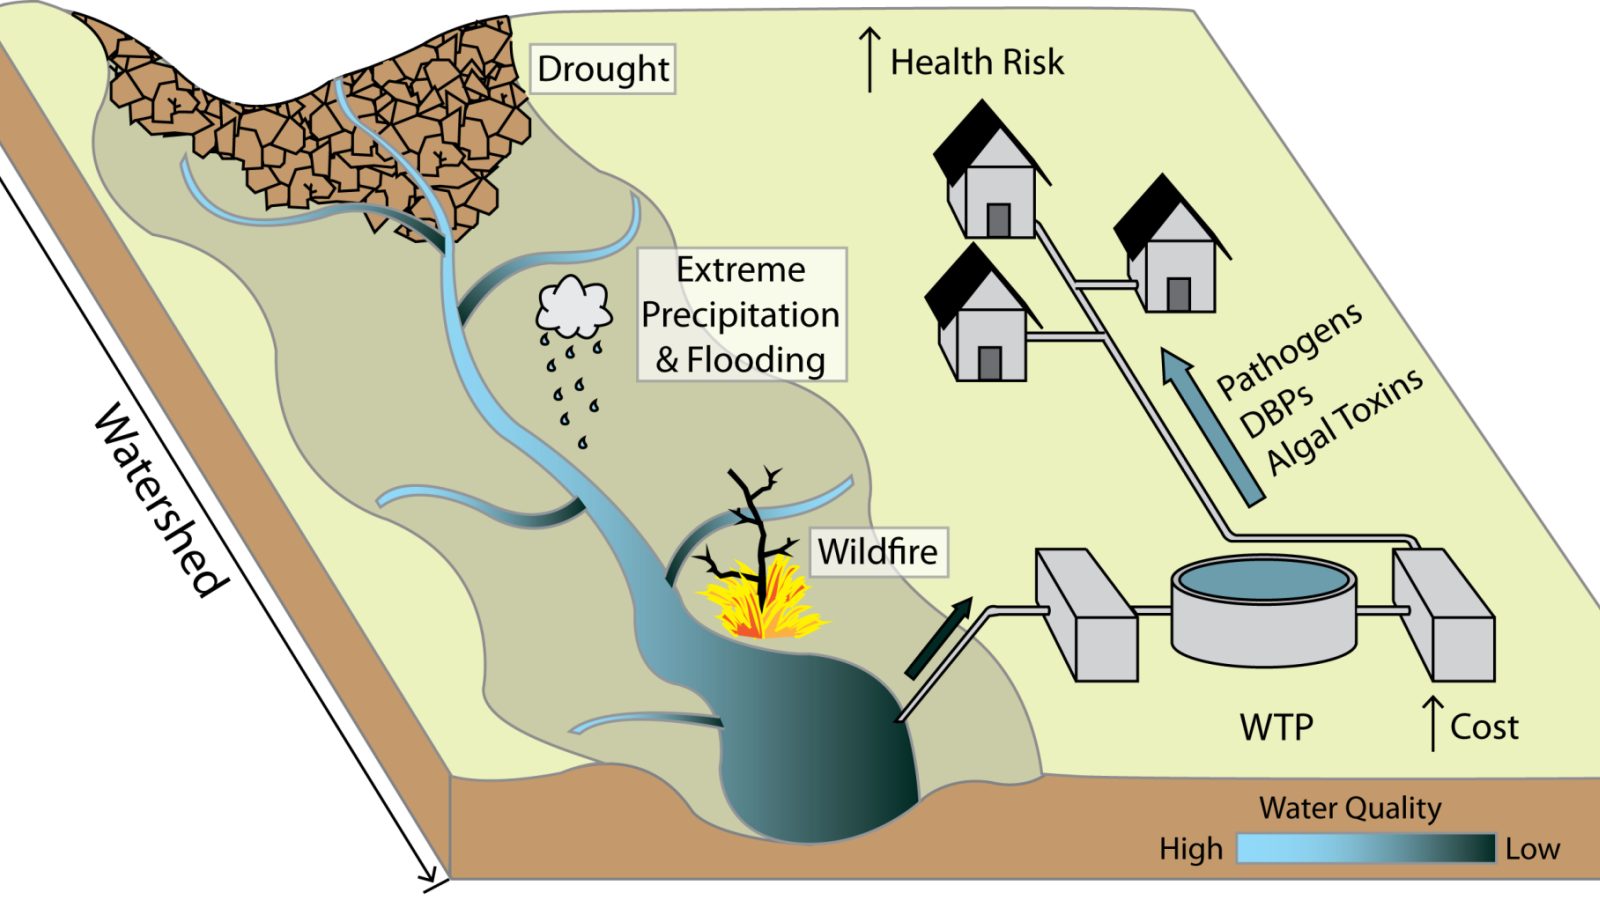 Climate change impacts on water treatment systems, from Raseman et al (2016)